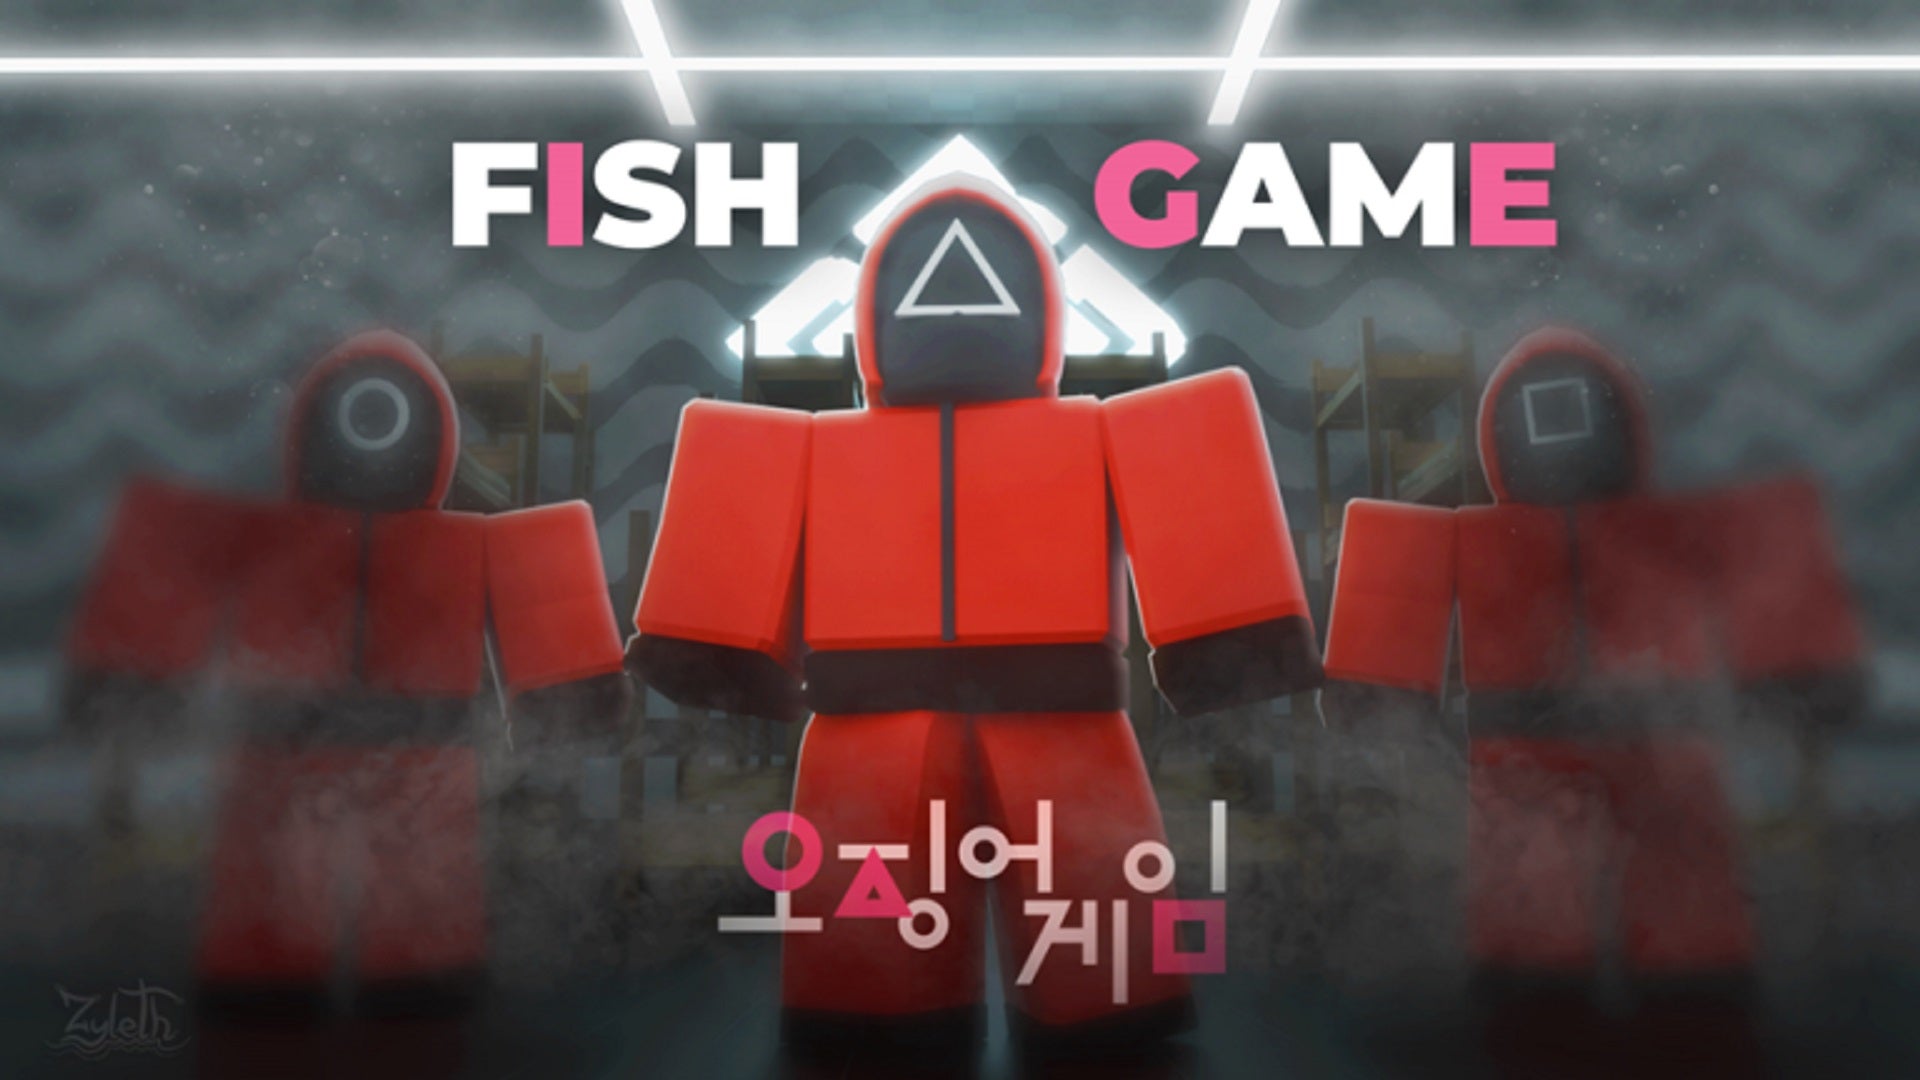 Three Roblox characters in Squid Game guard costumes. Text in image reads "Fish Game".